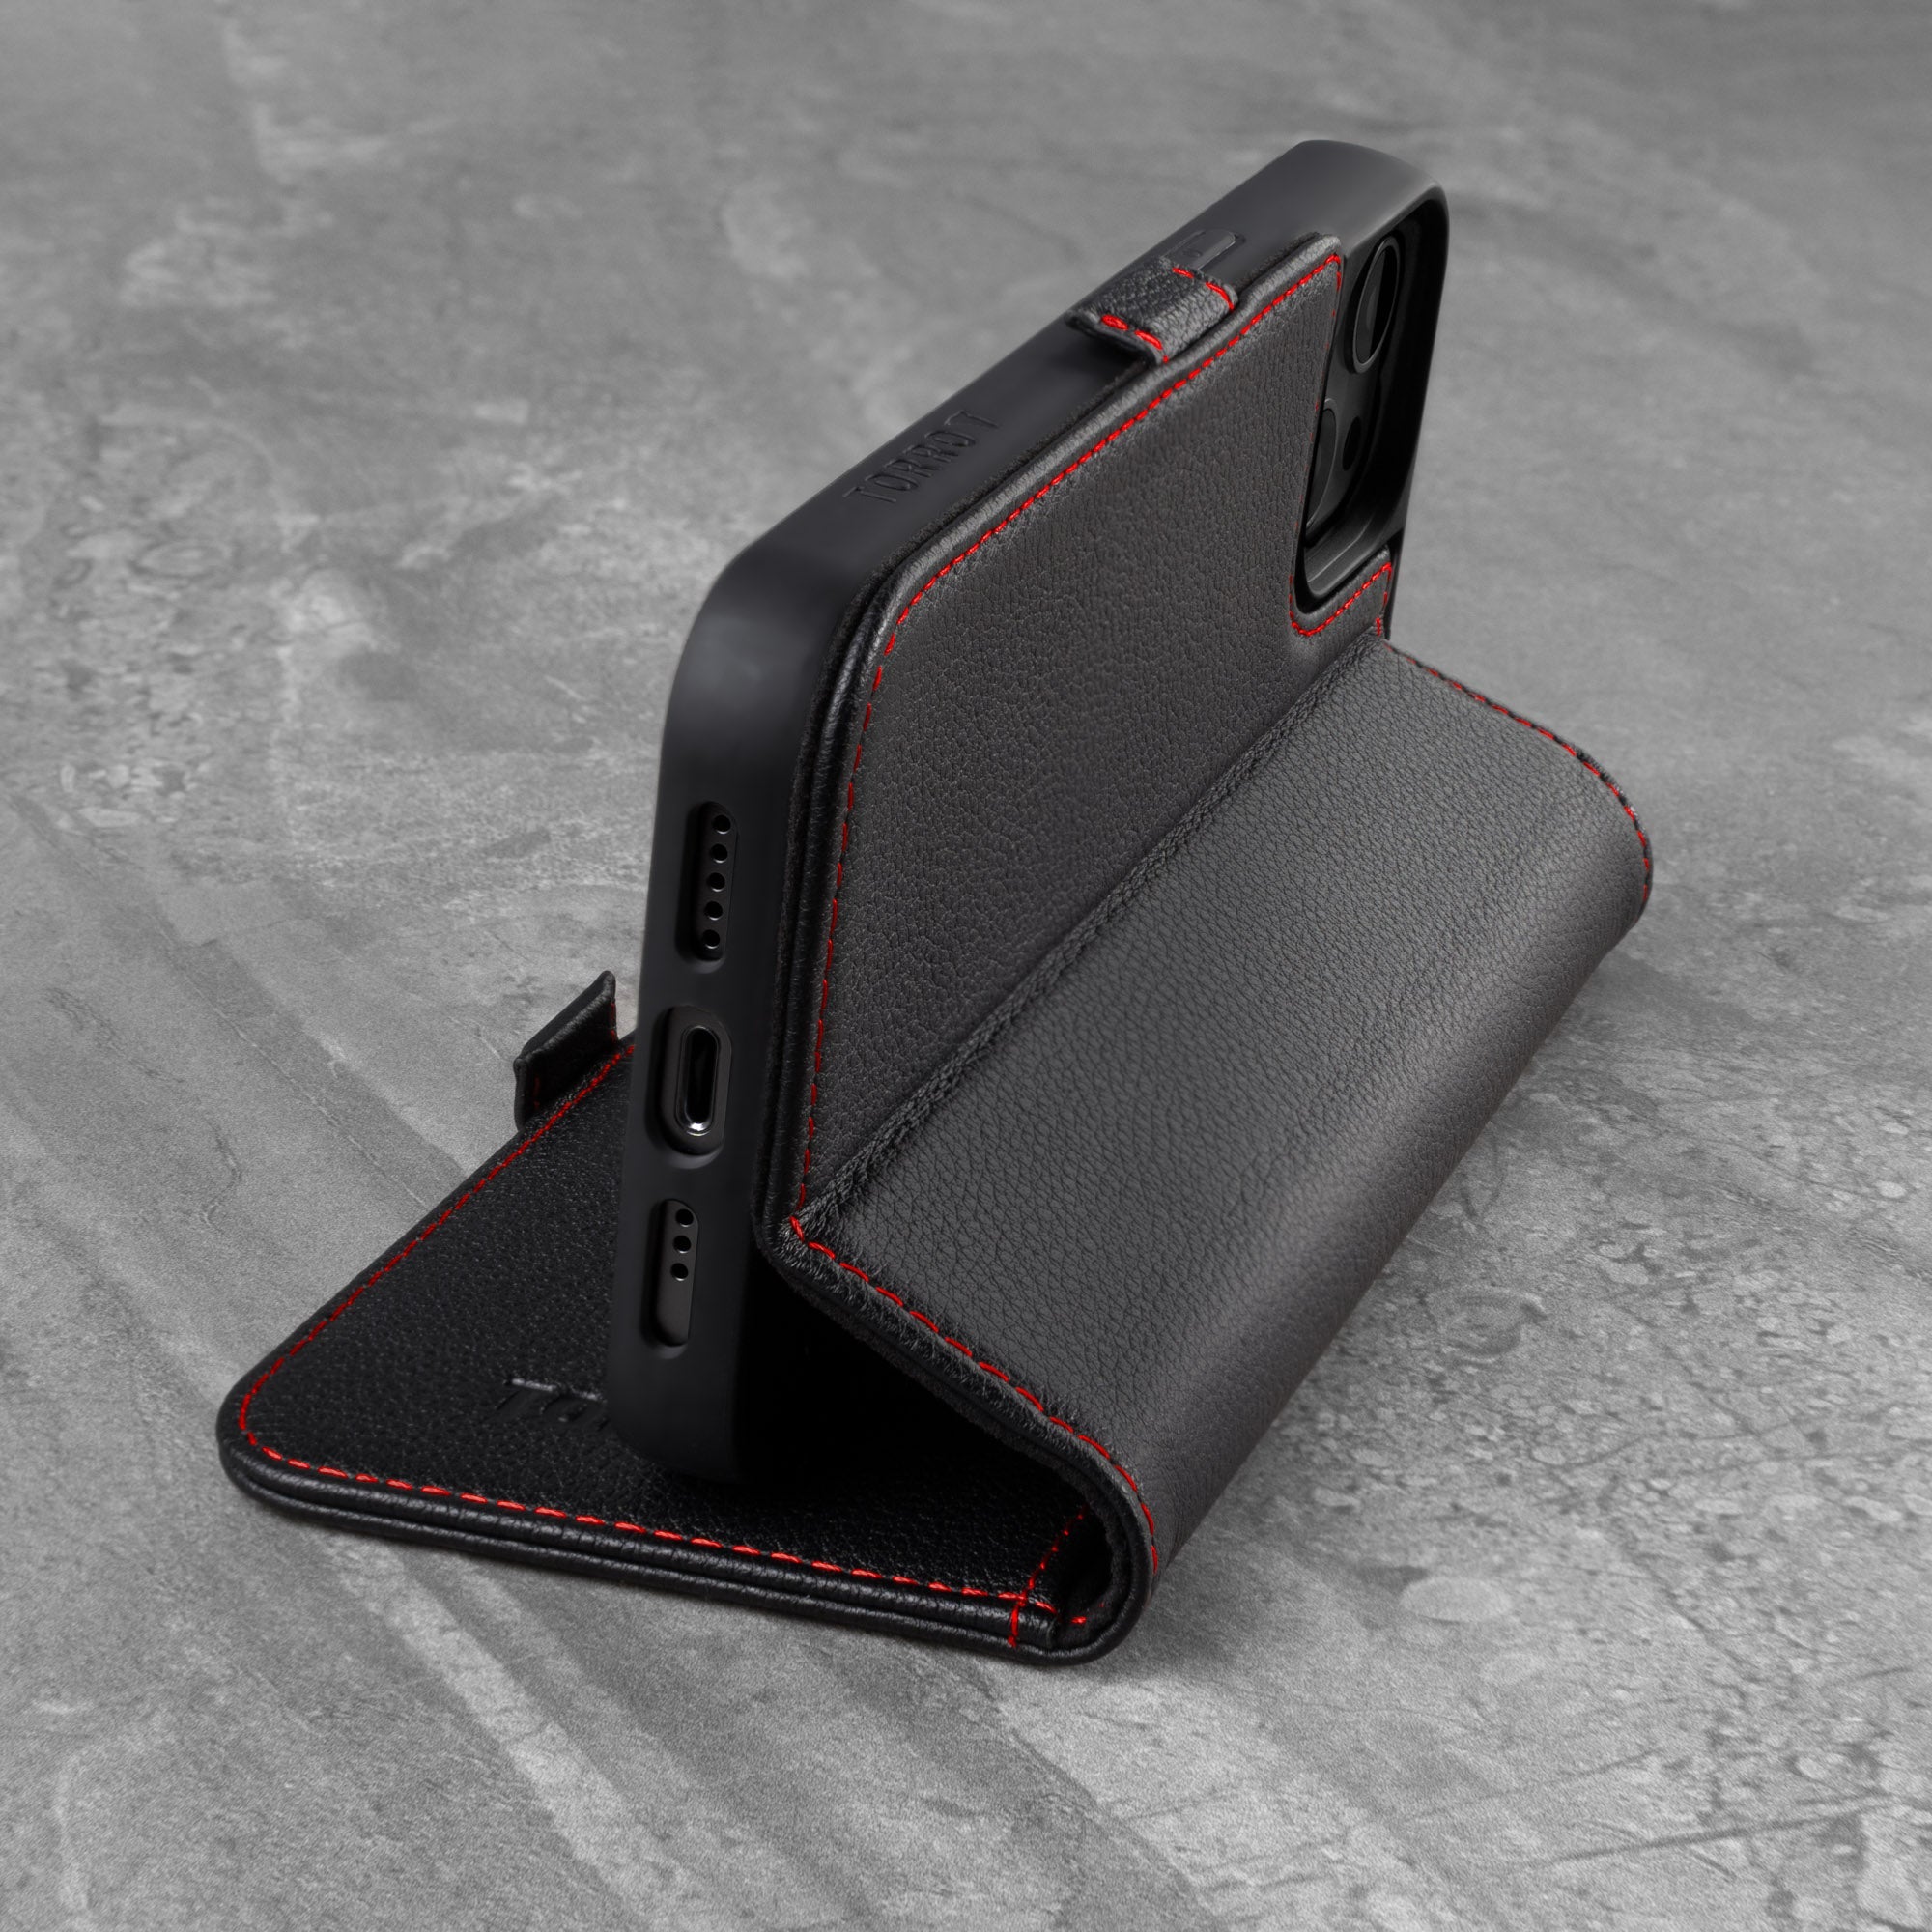 iPhone 13 Pro Max Leather Case (with stand function)